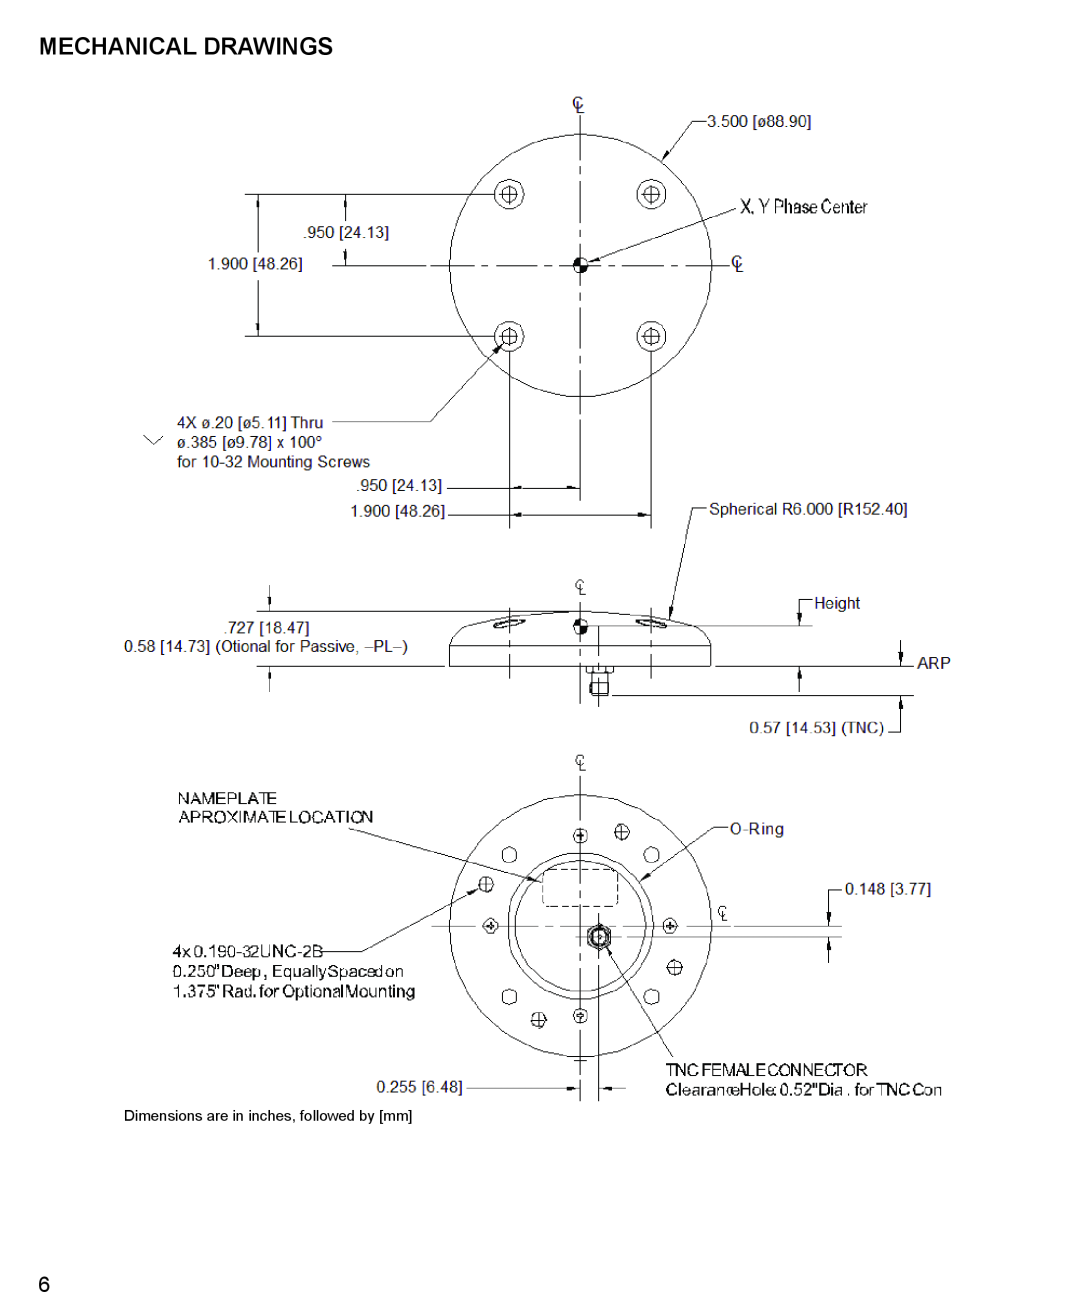 Novatel 3GOXX16A4-XTR-1-1 manual Mechanical Drawings, Dimensions are in inches, followed by mm 